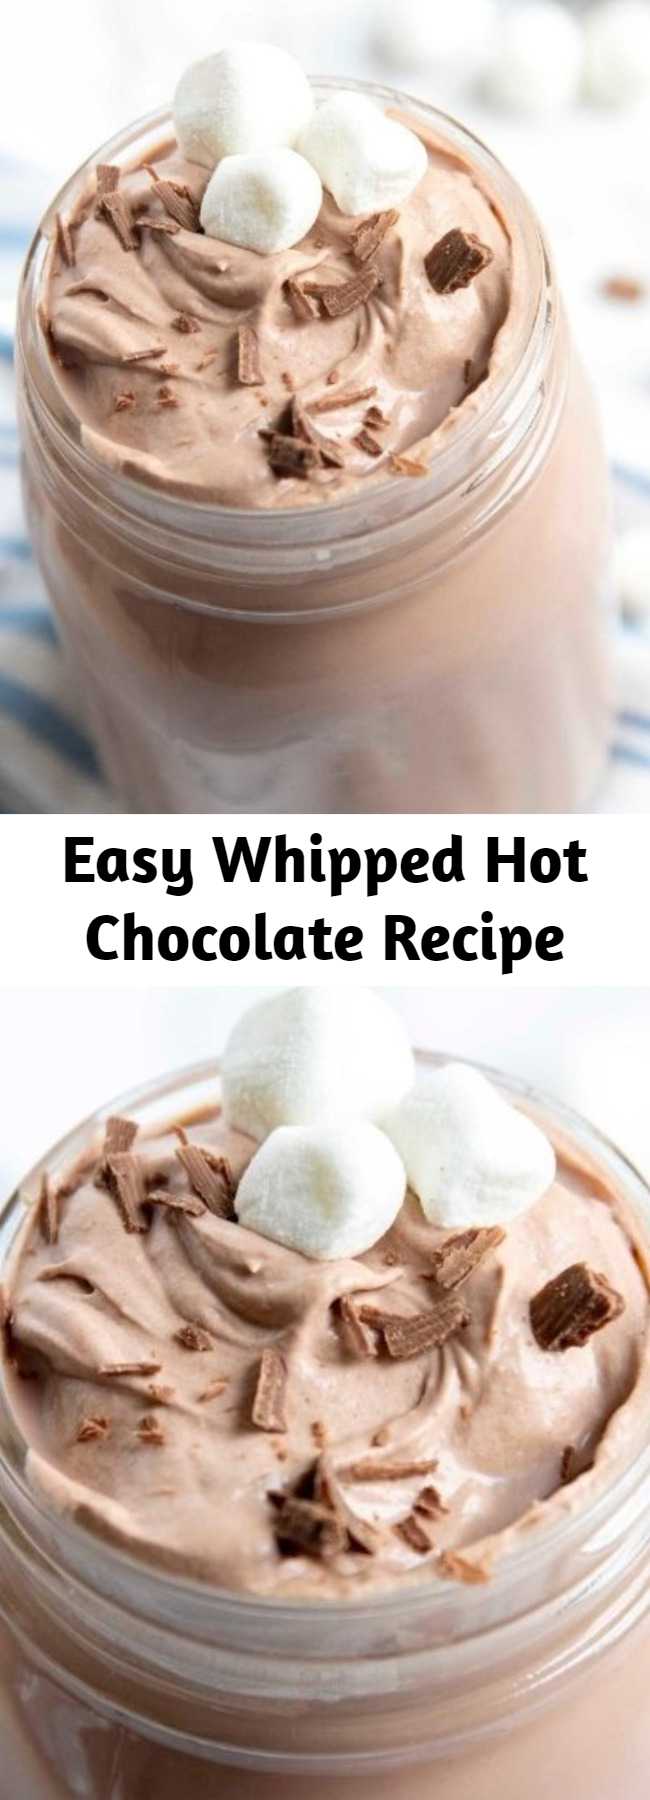 Easy Whipped Hot Chocolate Recipe - 3 ingredients are all you need to make this whipped hot chocolate. You only need a few minutes to make this whipped hot chocolate recipe, which makes it even better. Similar to a Dalgona drink but without the instant coffee!